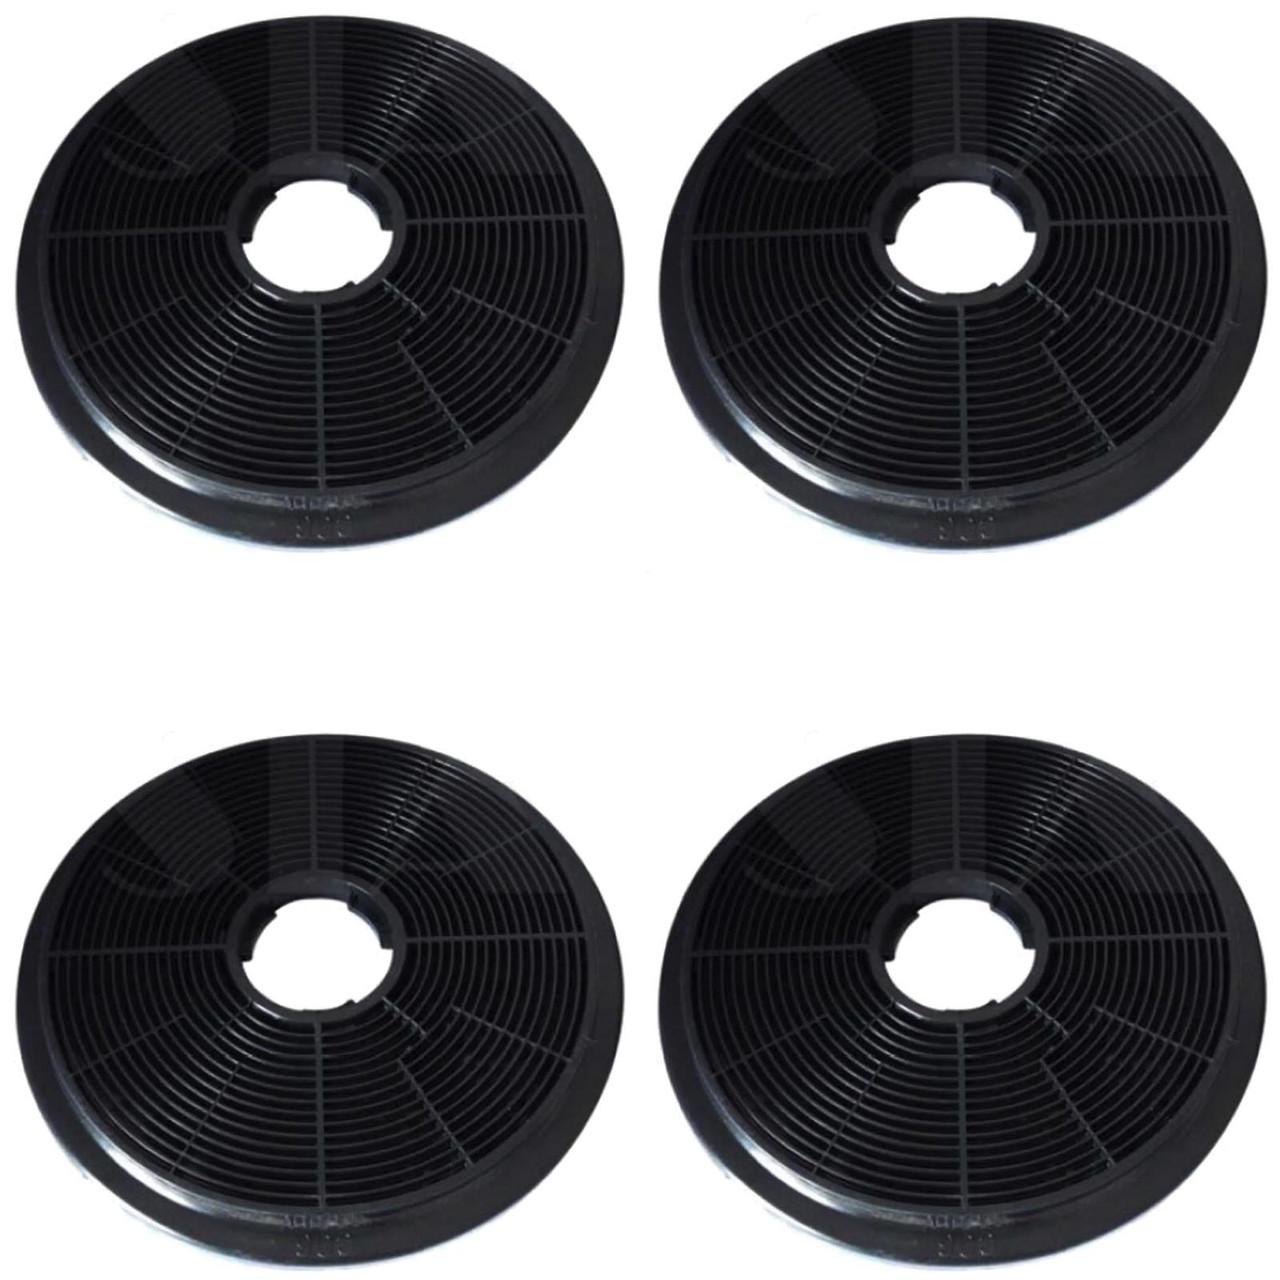 2x CO6 Carbon Re-circulation Filters for SIA Kitchen Cooker Hood Extractor Fans